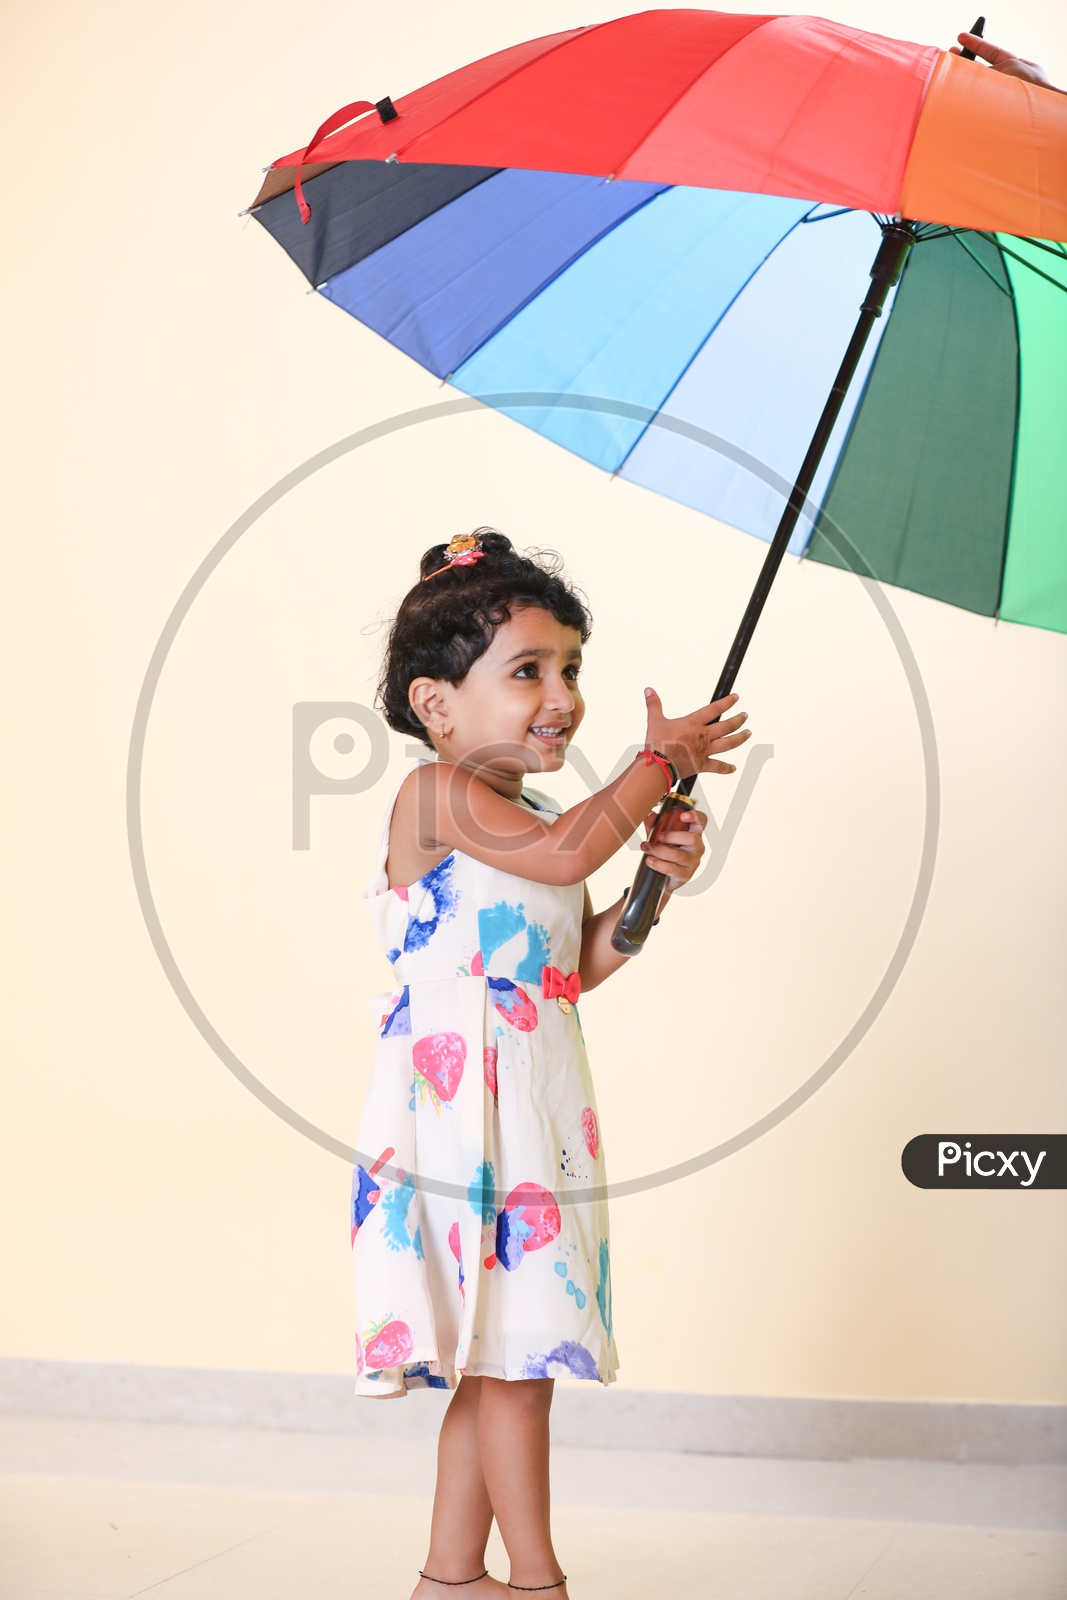 Wallpaper pose, model, portrait, umbrella, makeup, figure, dress, hairstyle  for mobile and desktop, section девушки, resolution 3280x2187 - download